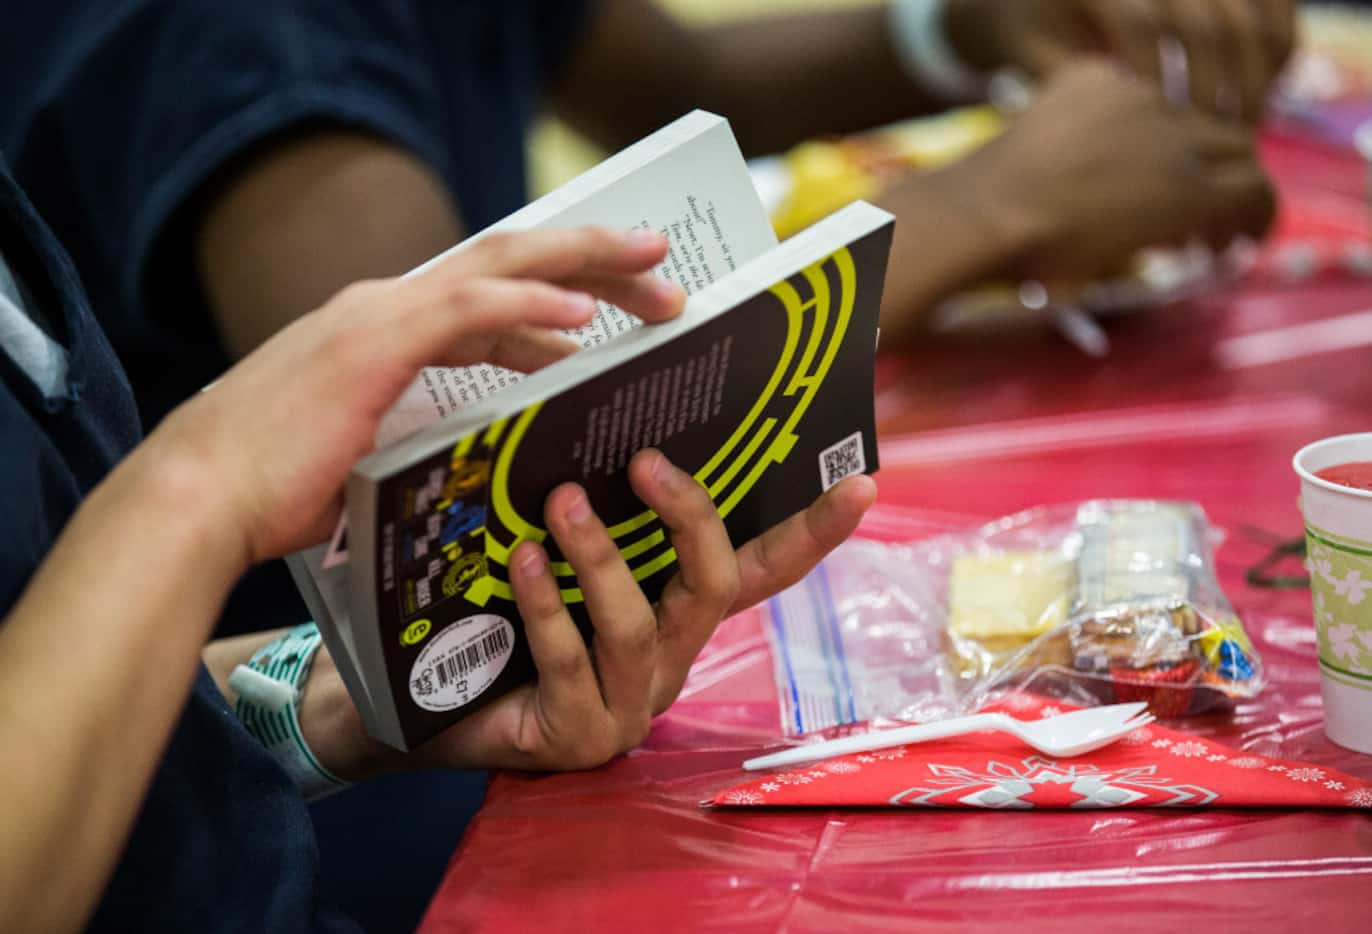 A juvenile inmate looks at a book he received at the lunch provided by JuviGap. (Ashley...